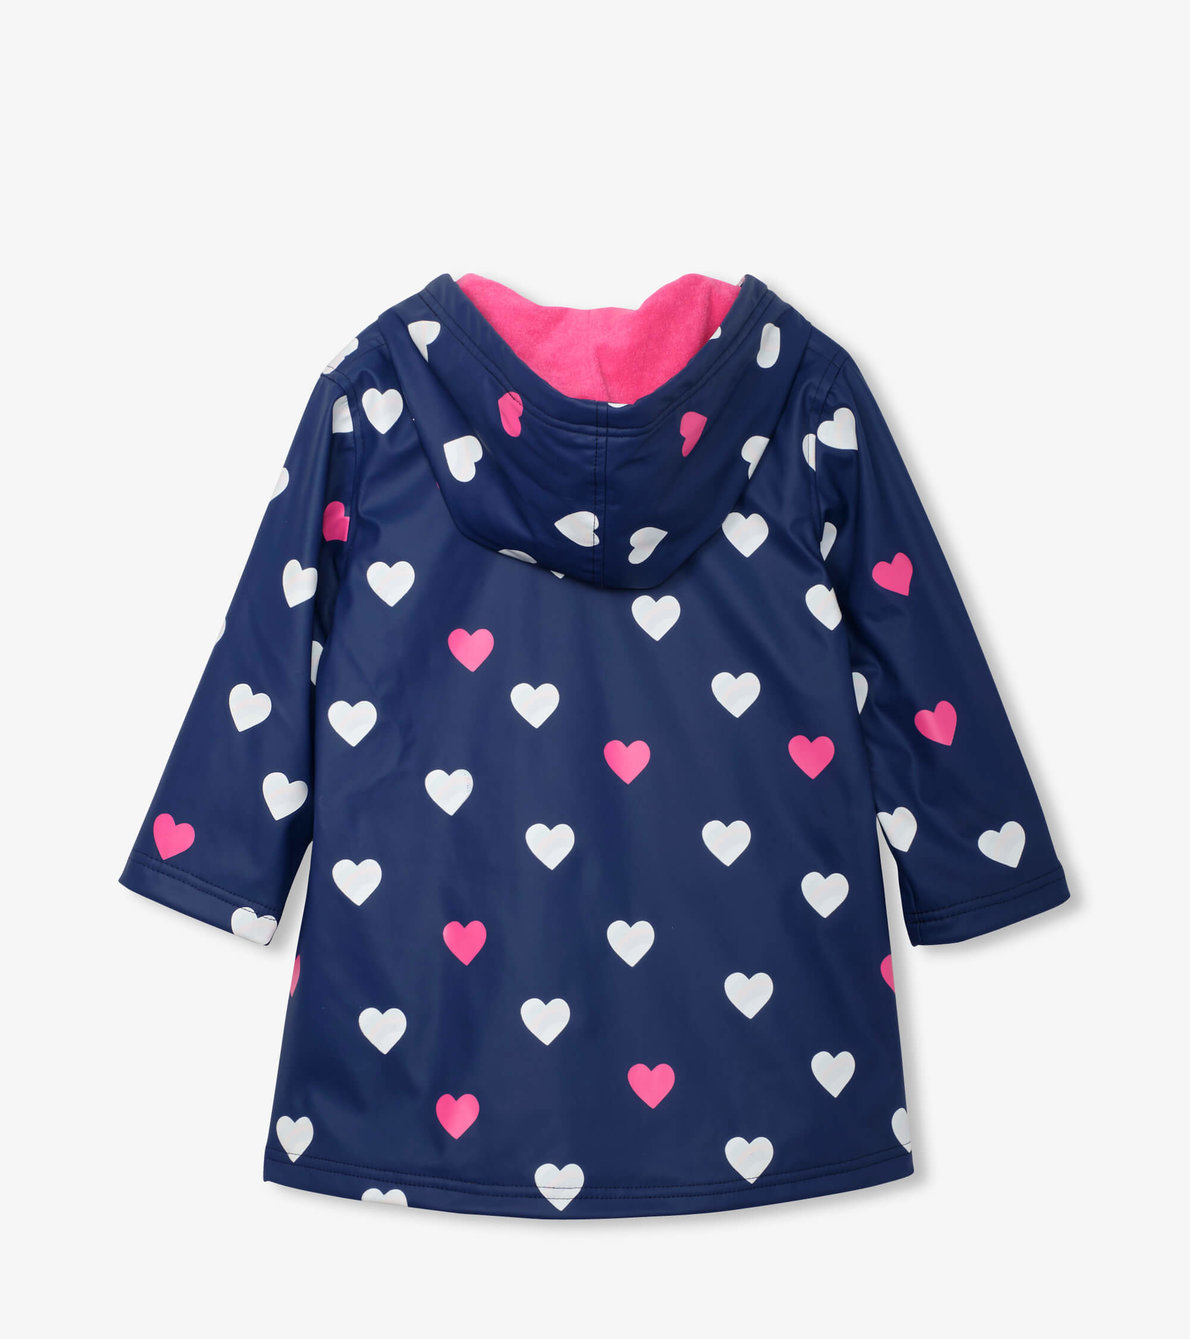 View larger image of Striped Hearts Colour Changing Splash Jacket